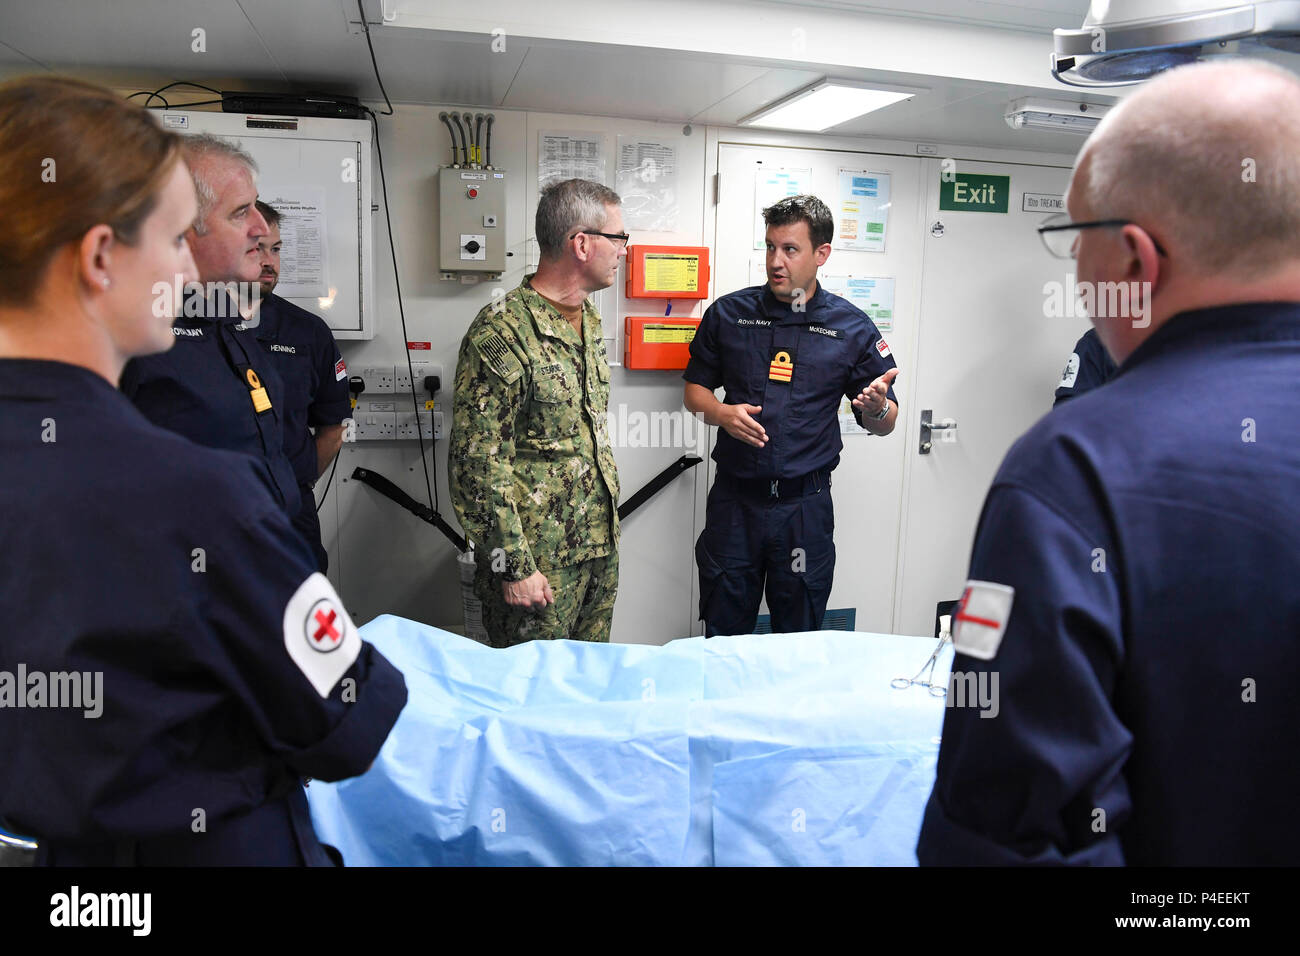 180617-N-TB177-0018 ARABIAN GULF (June 17, 2018) Vice Adm. Scott Stearney, commander of U.S. Naval Forces Central Command, U.S. 5th Fleet, Combined Maritime Forces, center, speaks with members of the Royal Navy aboard Royal Fleet Auxiliary ship Cardigan Bay during Mine Countermeasures Exercise (MCMEX) 18-2. The bilateral exercise enhances cooperation, mutual MCM capabilities and interoperability between the U.S. and U.K., demonstrating the shared commitment of ensuring unfettered operations of naval and support vessels, as well as commercial shipping movements, throughout the maritime domain.  Stock Photo